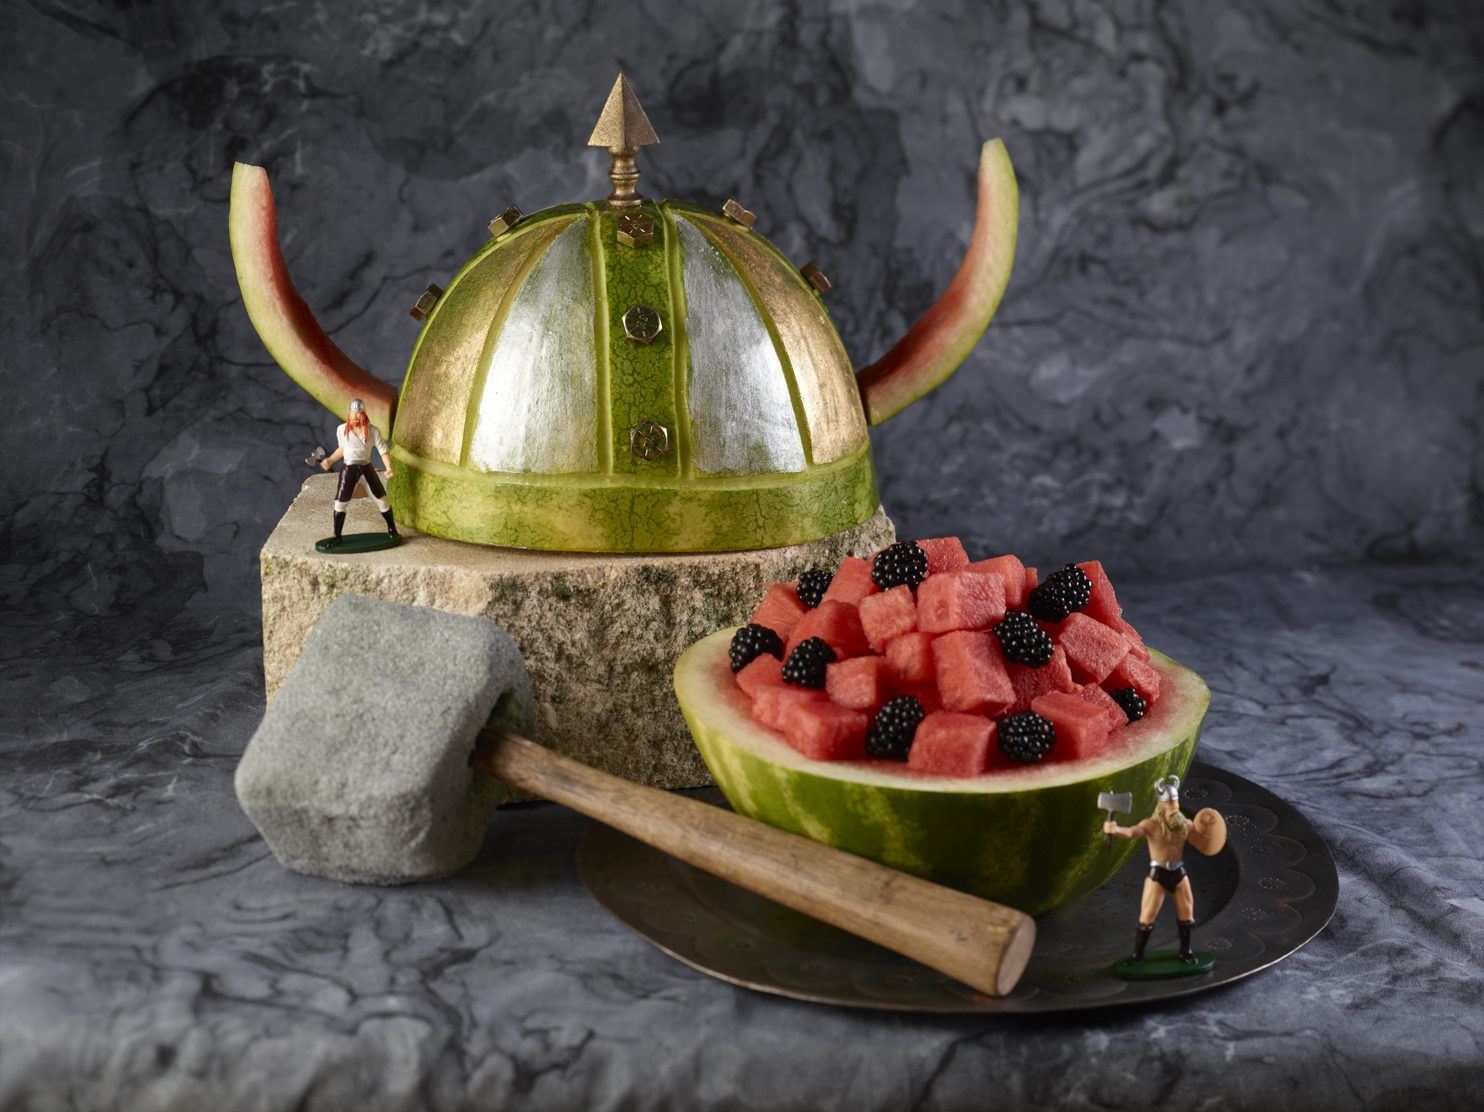 https://www.watermelon.org/wp-content/uploads/2020/03/Adult-Viking-Carving-2013.jpg